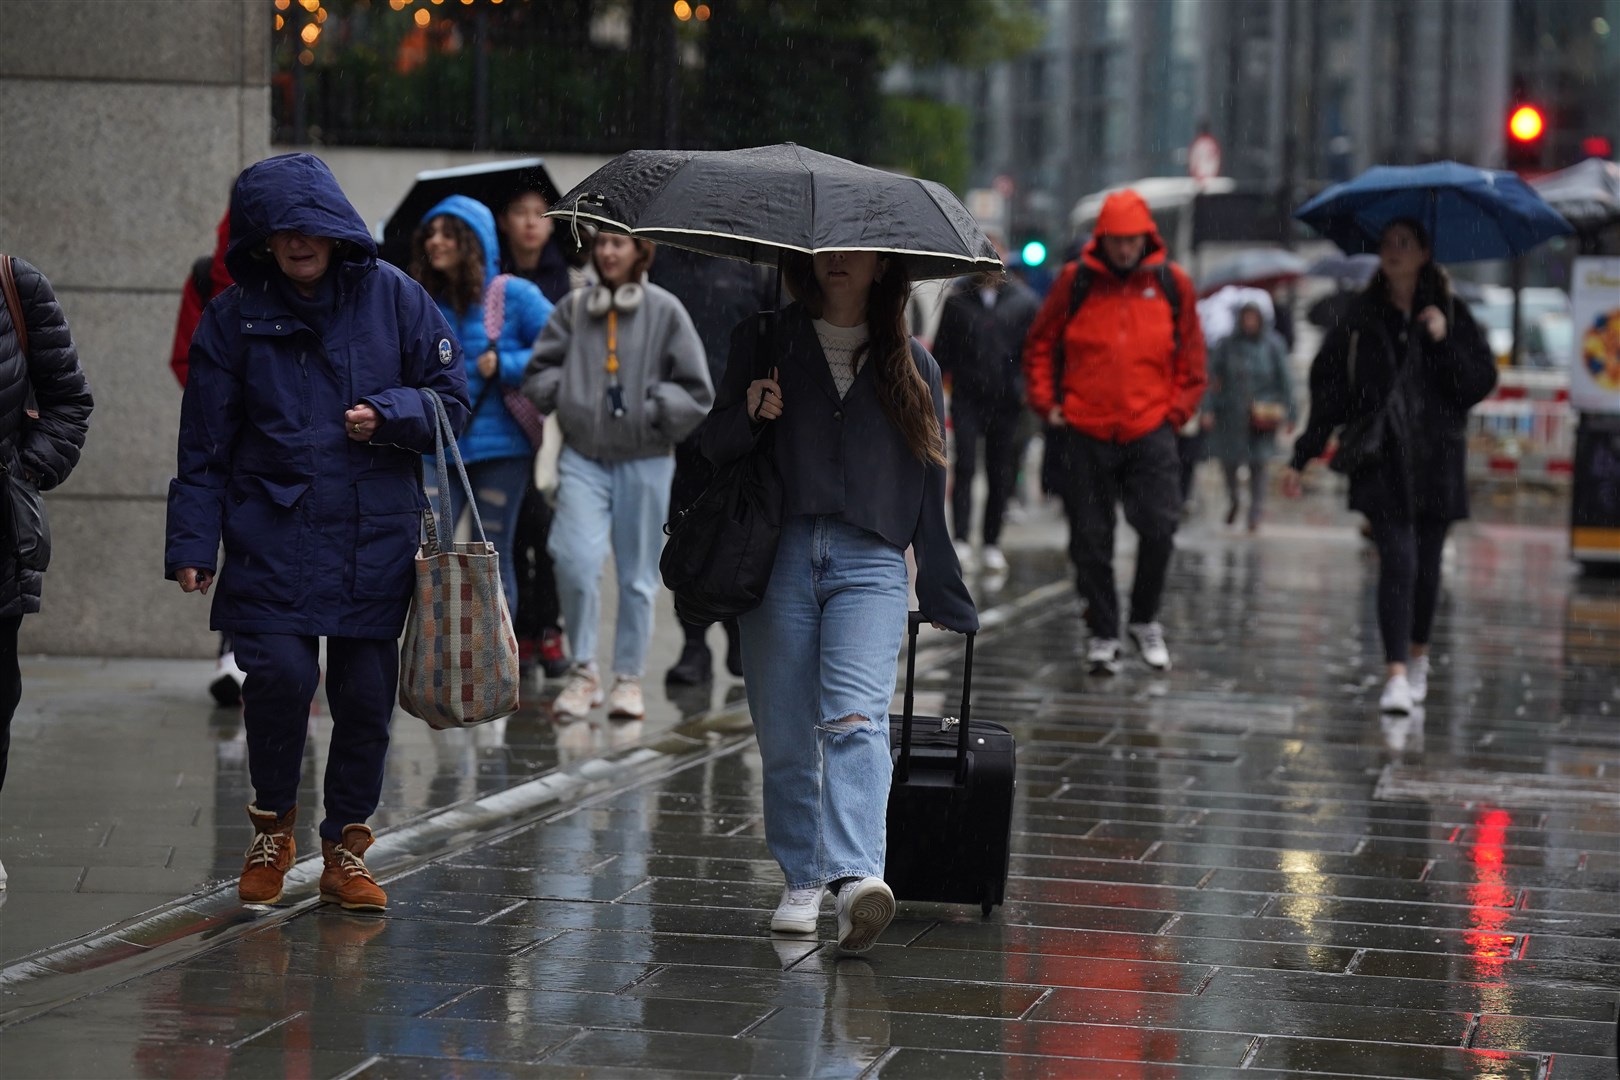 London has also experienced heavy rain (Lucy North/PA)